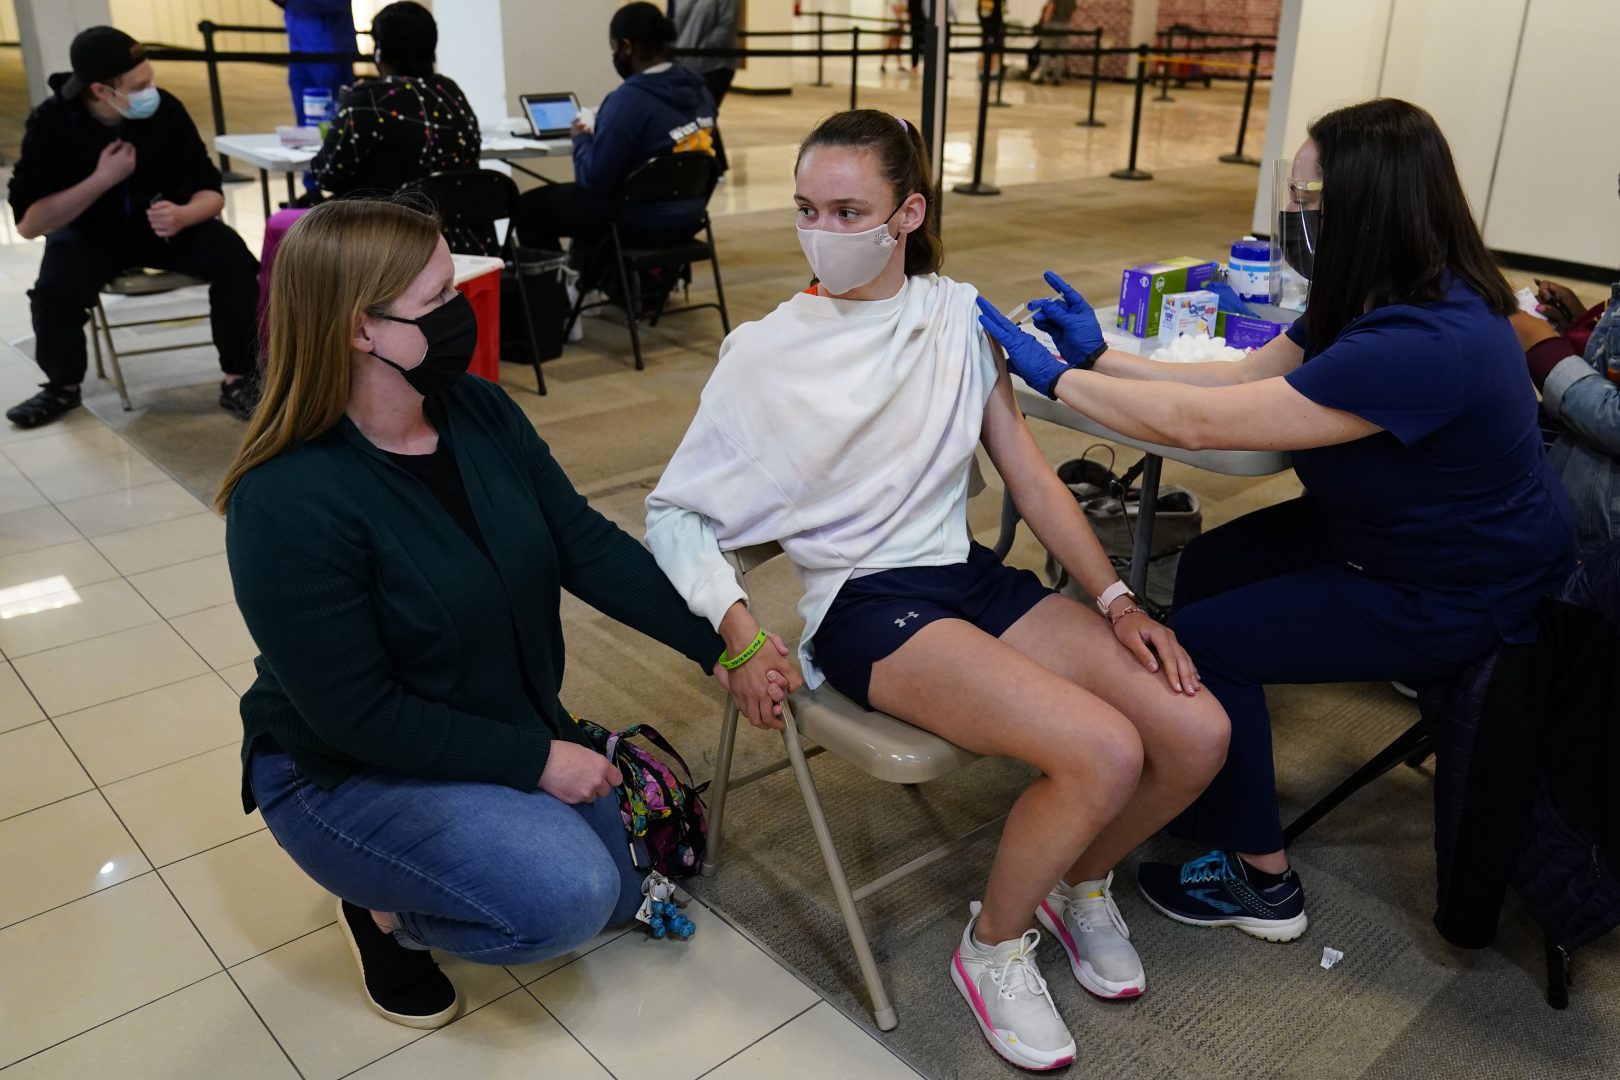 Meg Edwards, left, of Flourtown, Pa., comforts her daughter, Kate Edwards, 15, as she receives a Pfizer COVID-19 vaccination from registered nurse Philene Moore at a Montgomery County, Pa. Office of Public Health vaccination clinic at the King of Prussia Mall, Tuesday, May 11, 2021, in King of Prussia, Pa. 